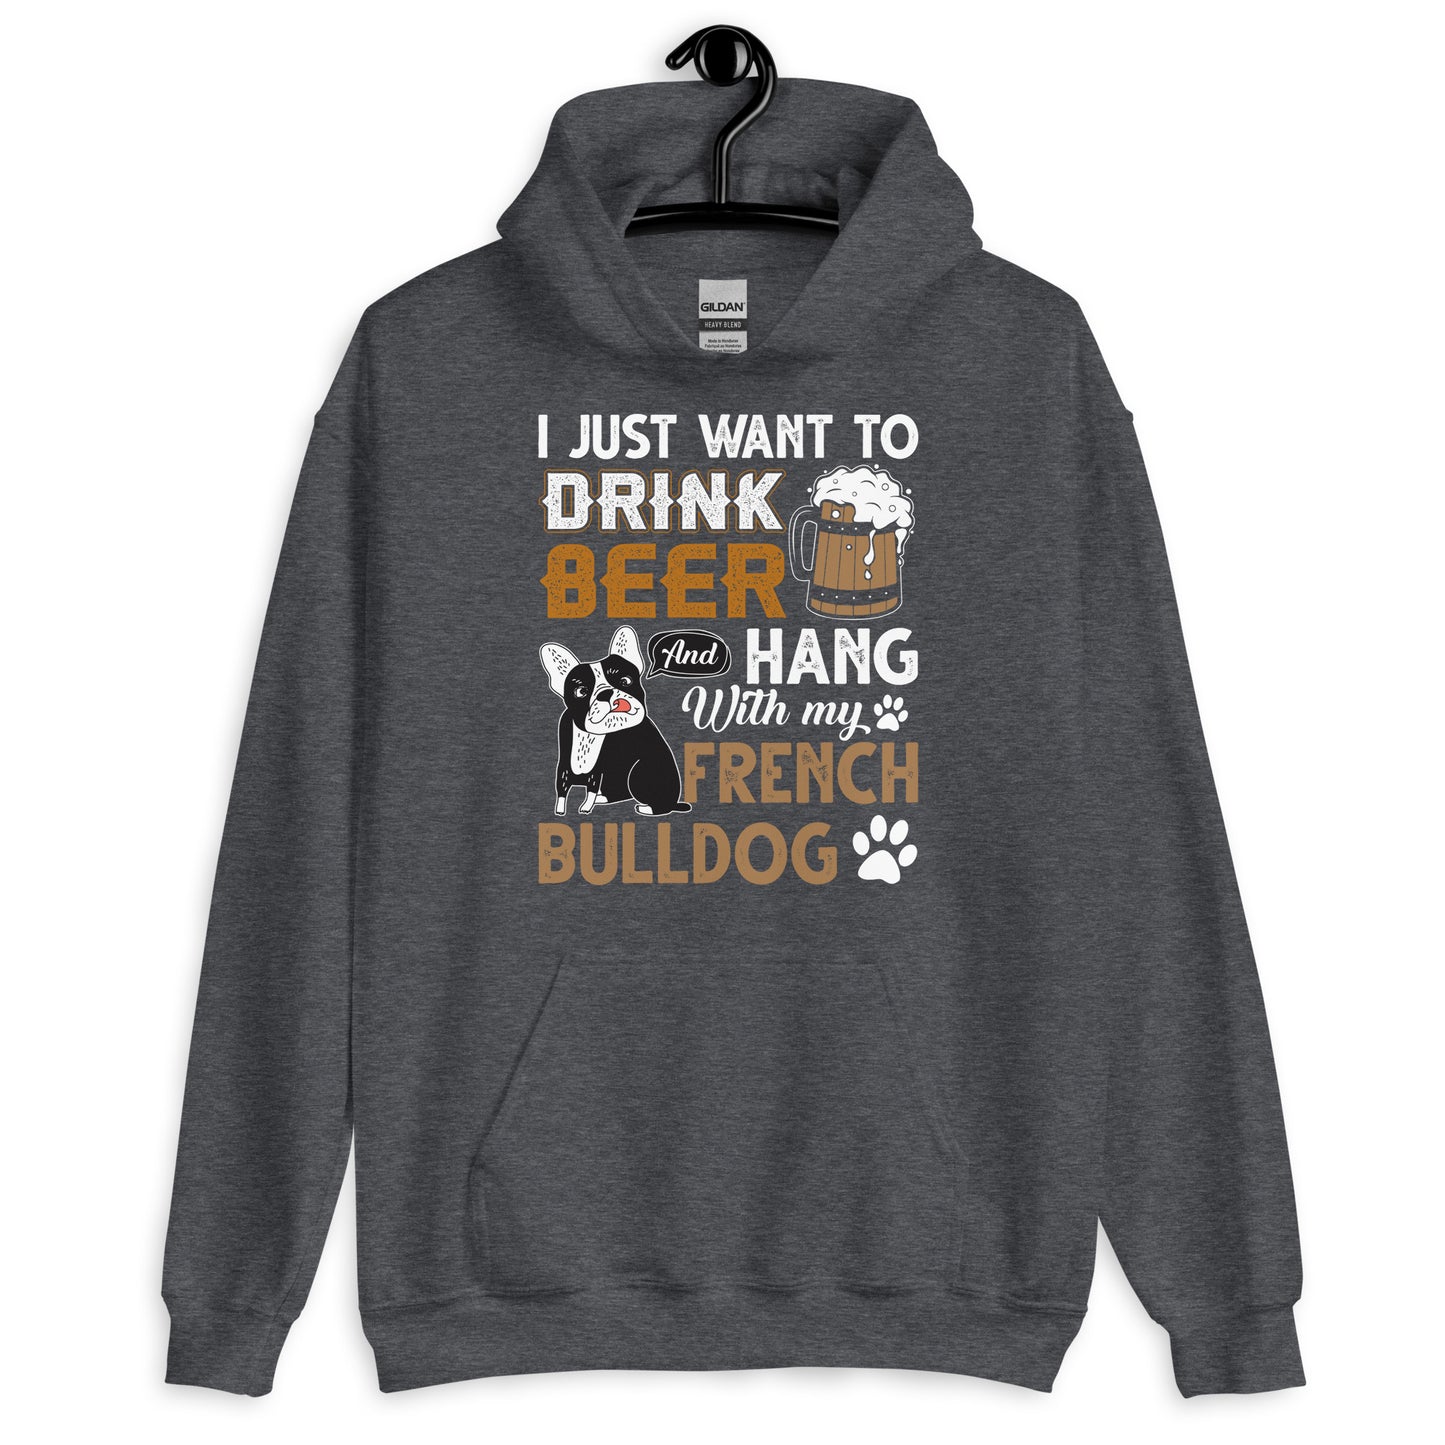 I Just Want to Drink Beer and Hang with my French Bulldog Hoodie